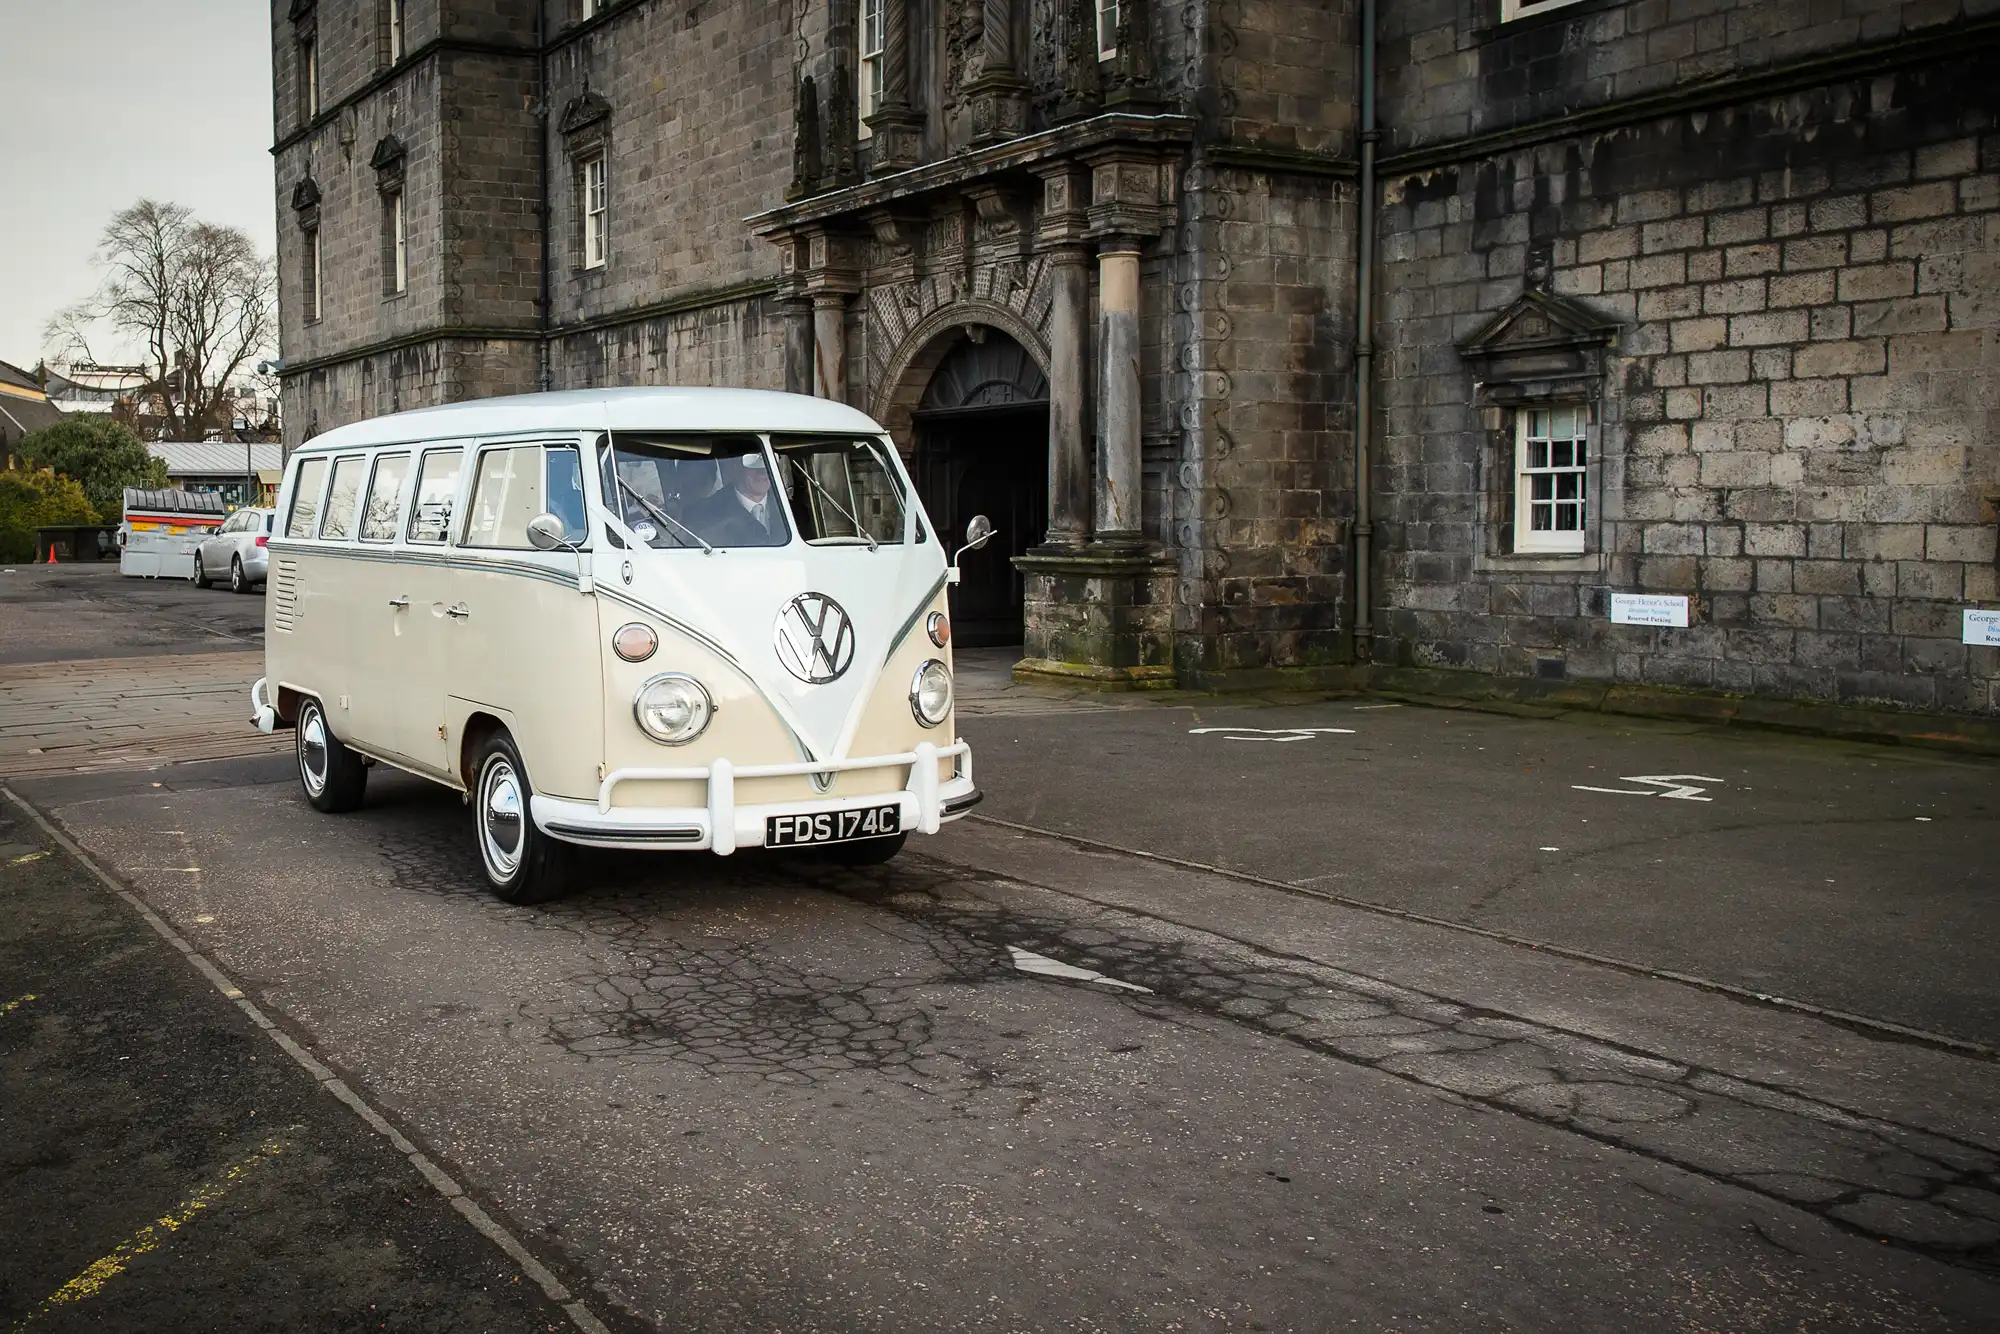 A vintage white volkswagen van parked in front of an old stone building with arched doorways.